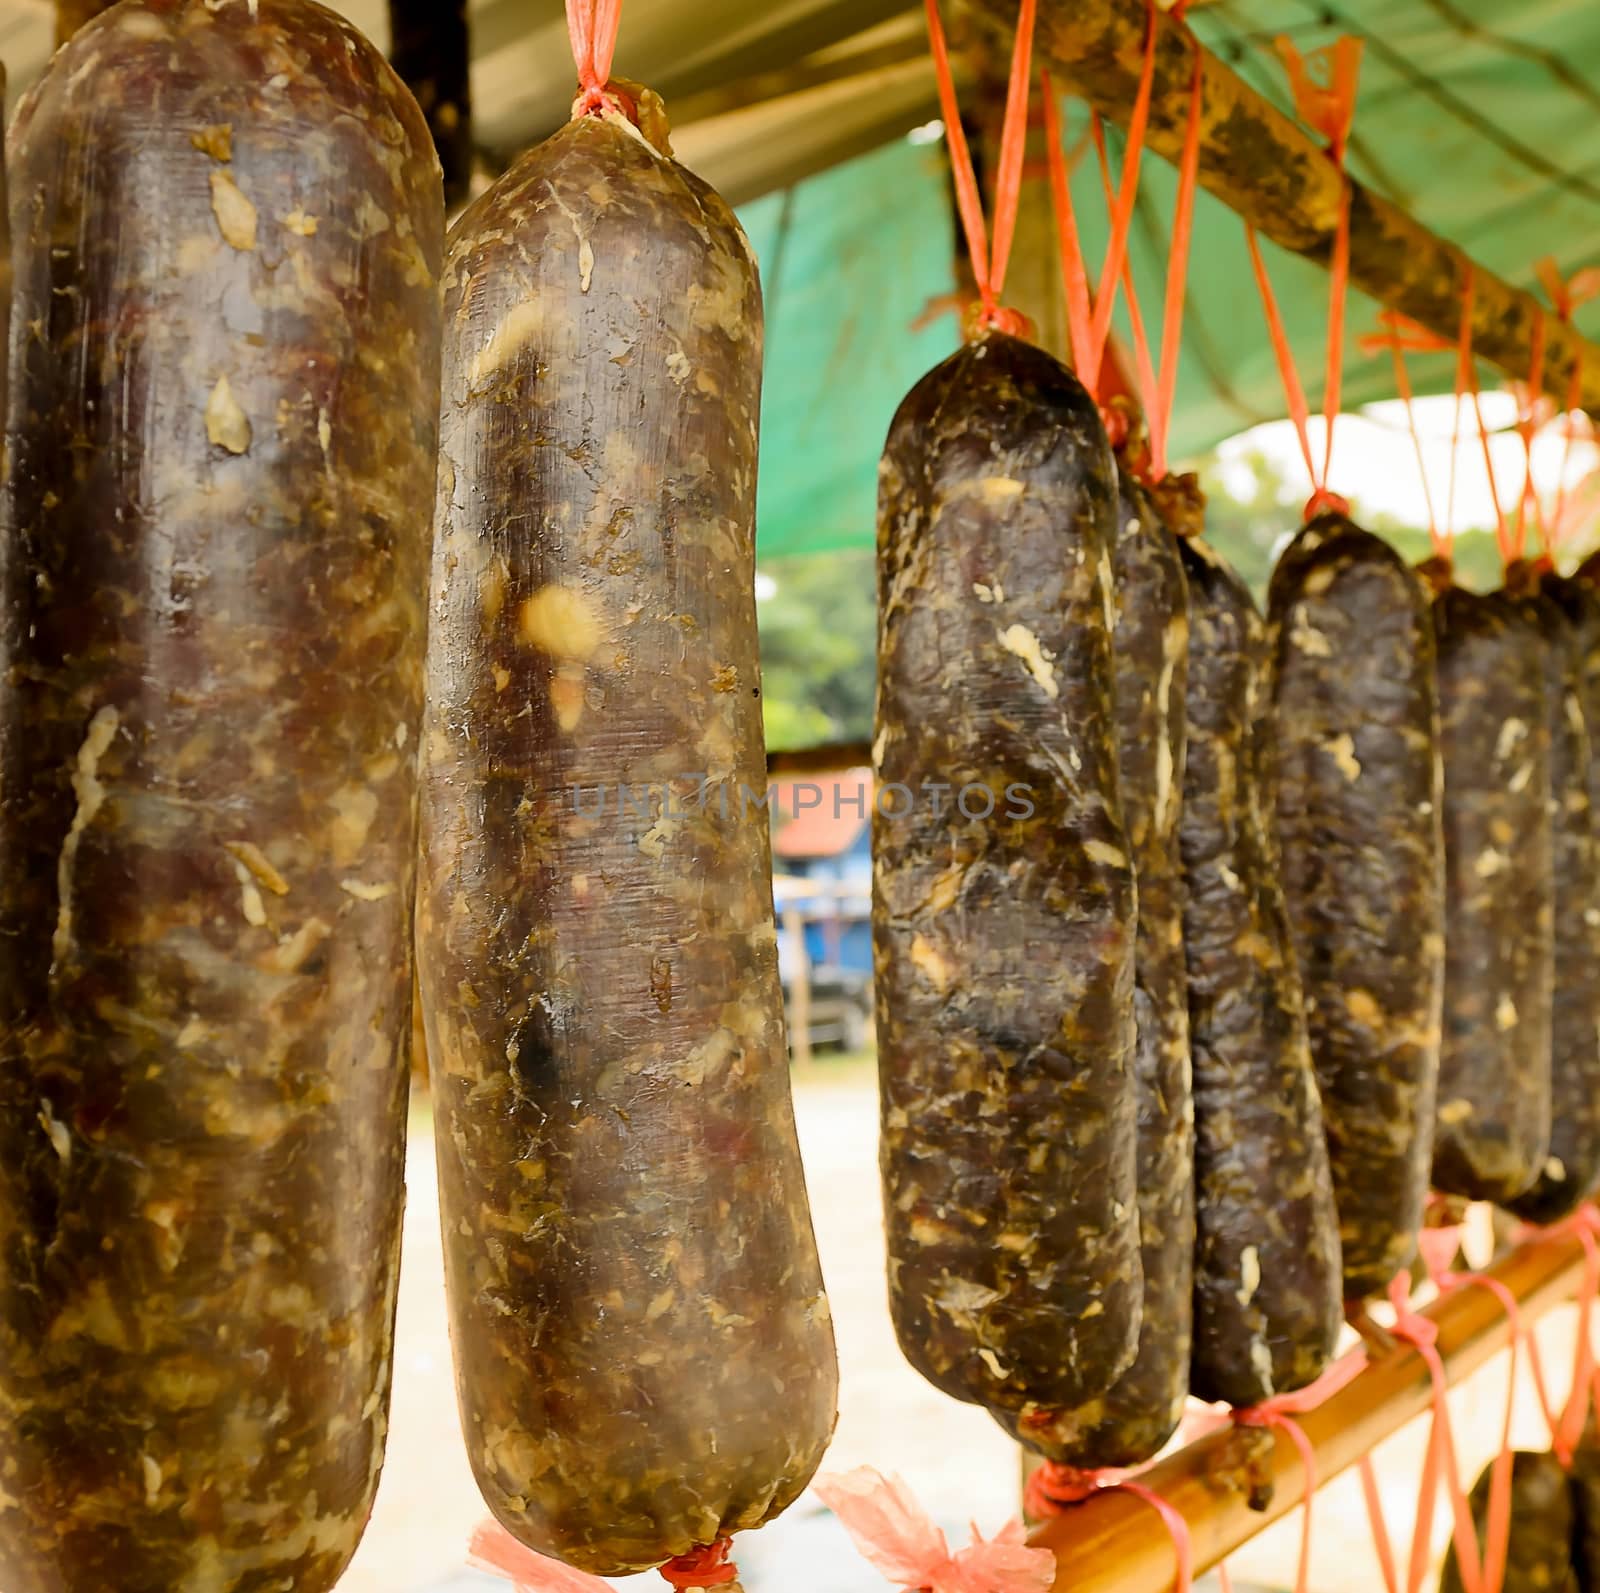 The local Sausage Food Preservation in Northern East of Thailand.